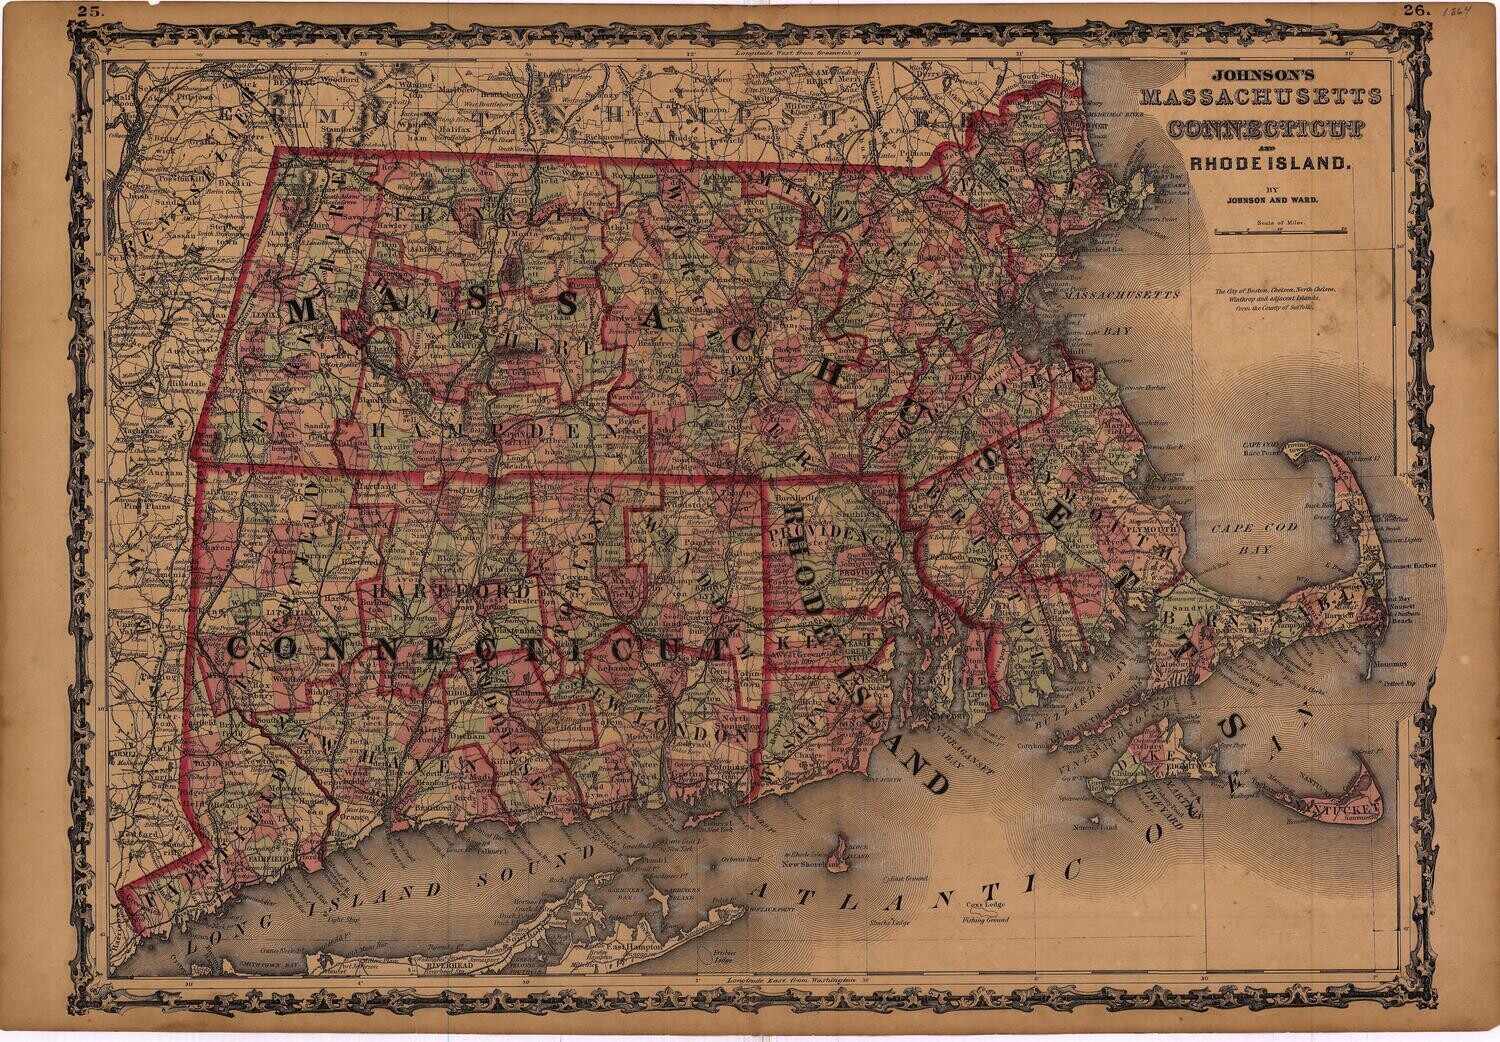 1864 Map of Massachusetts, Connecticut &amp; Rhode Island by Johnson &amp; Ward in Lithography w/OHC